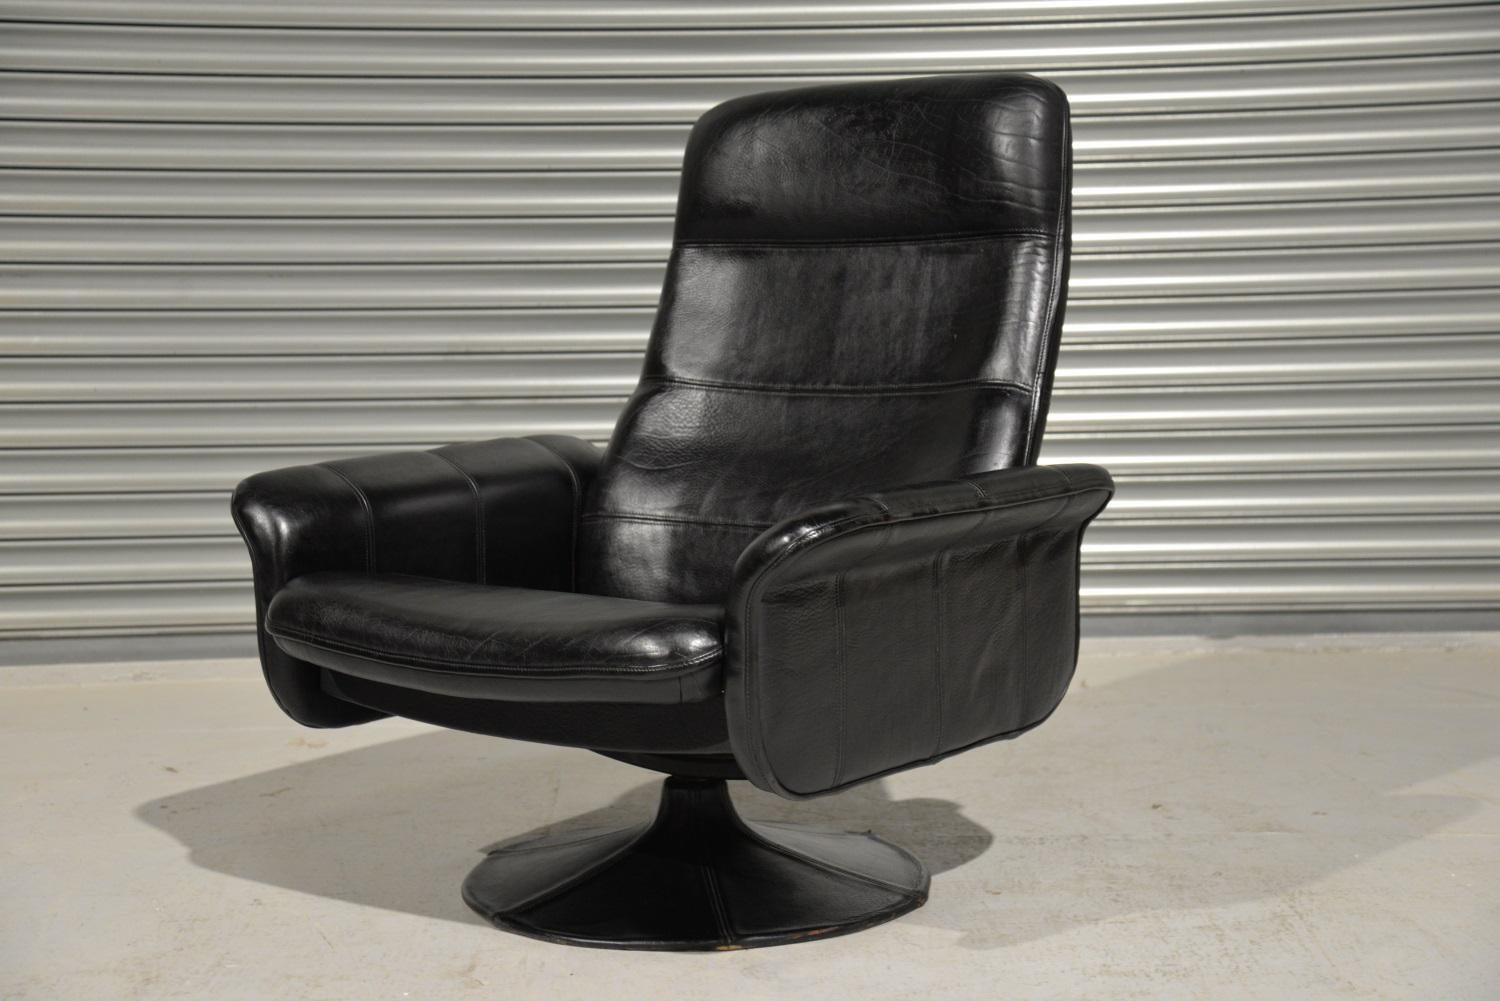 We are delighted to bring to you a vintage De Sede DS 50 swivel lounge armchair in stunning black leather. Built in the 1970s by De Sede craftsman in Switzerland, this armchair is brought to you in excellent vintage condition. Not only does this